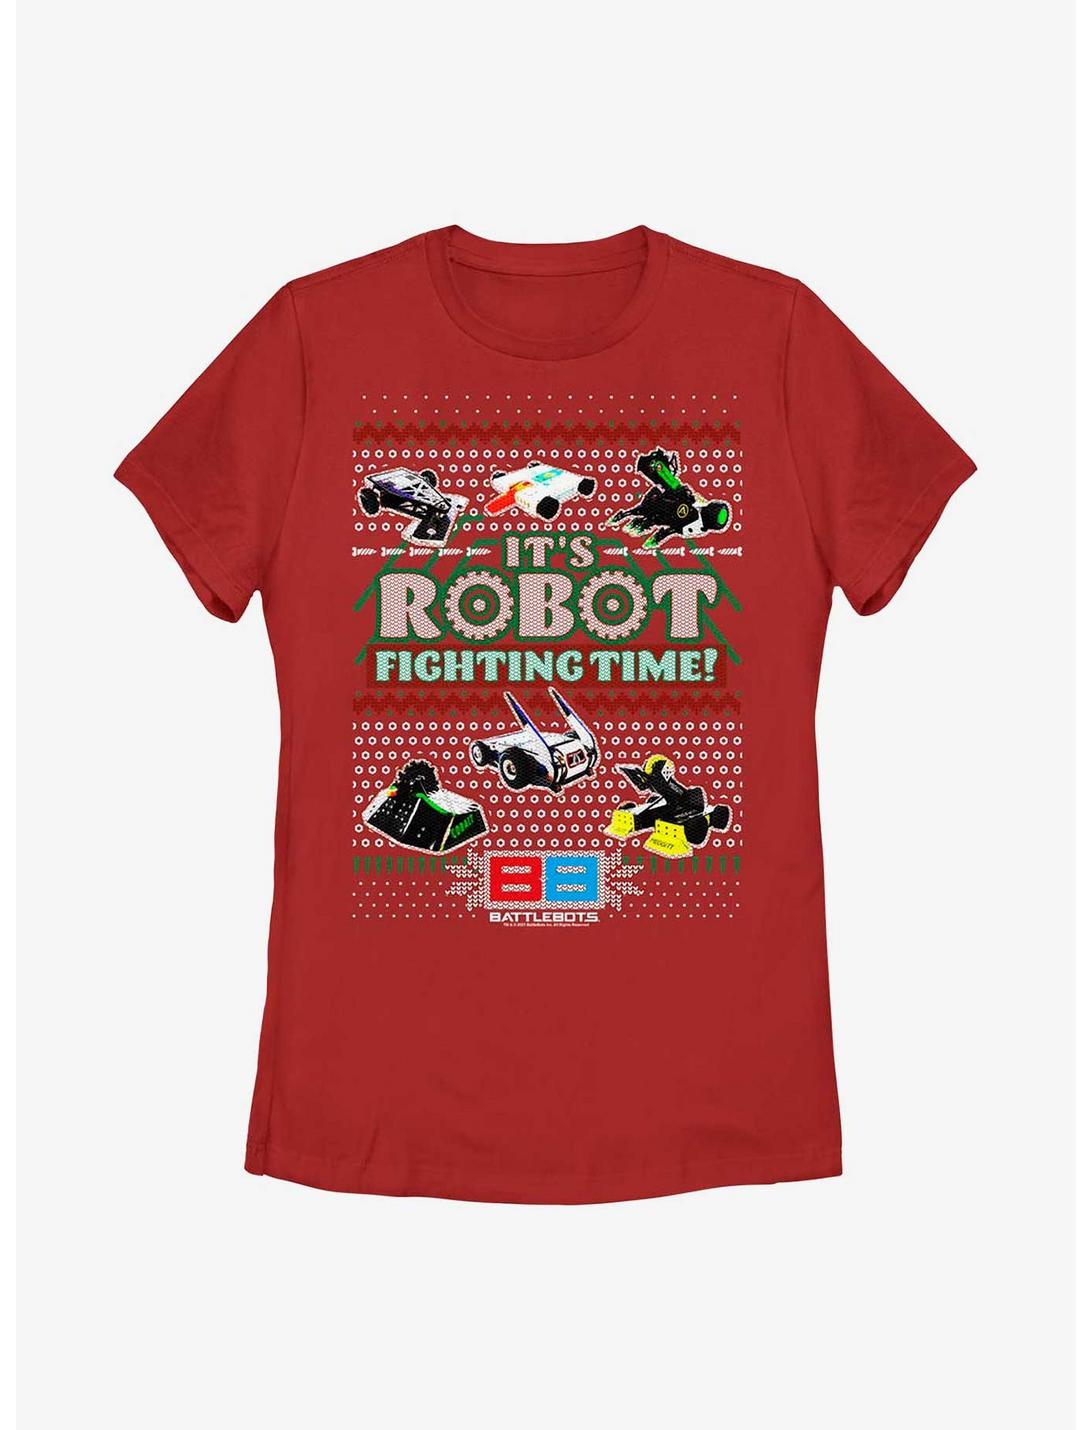 BattleBots It's Robot Fighting TIme Womens T-Shirt, RED, hi-res